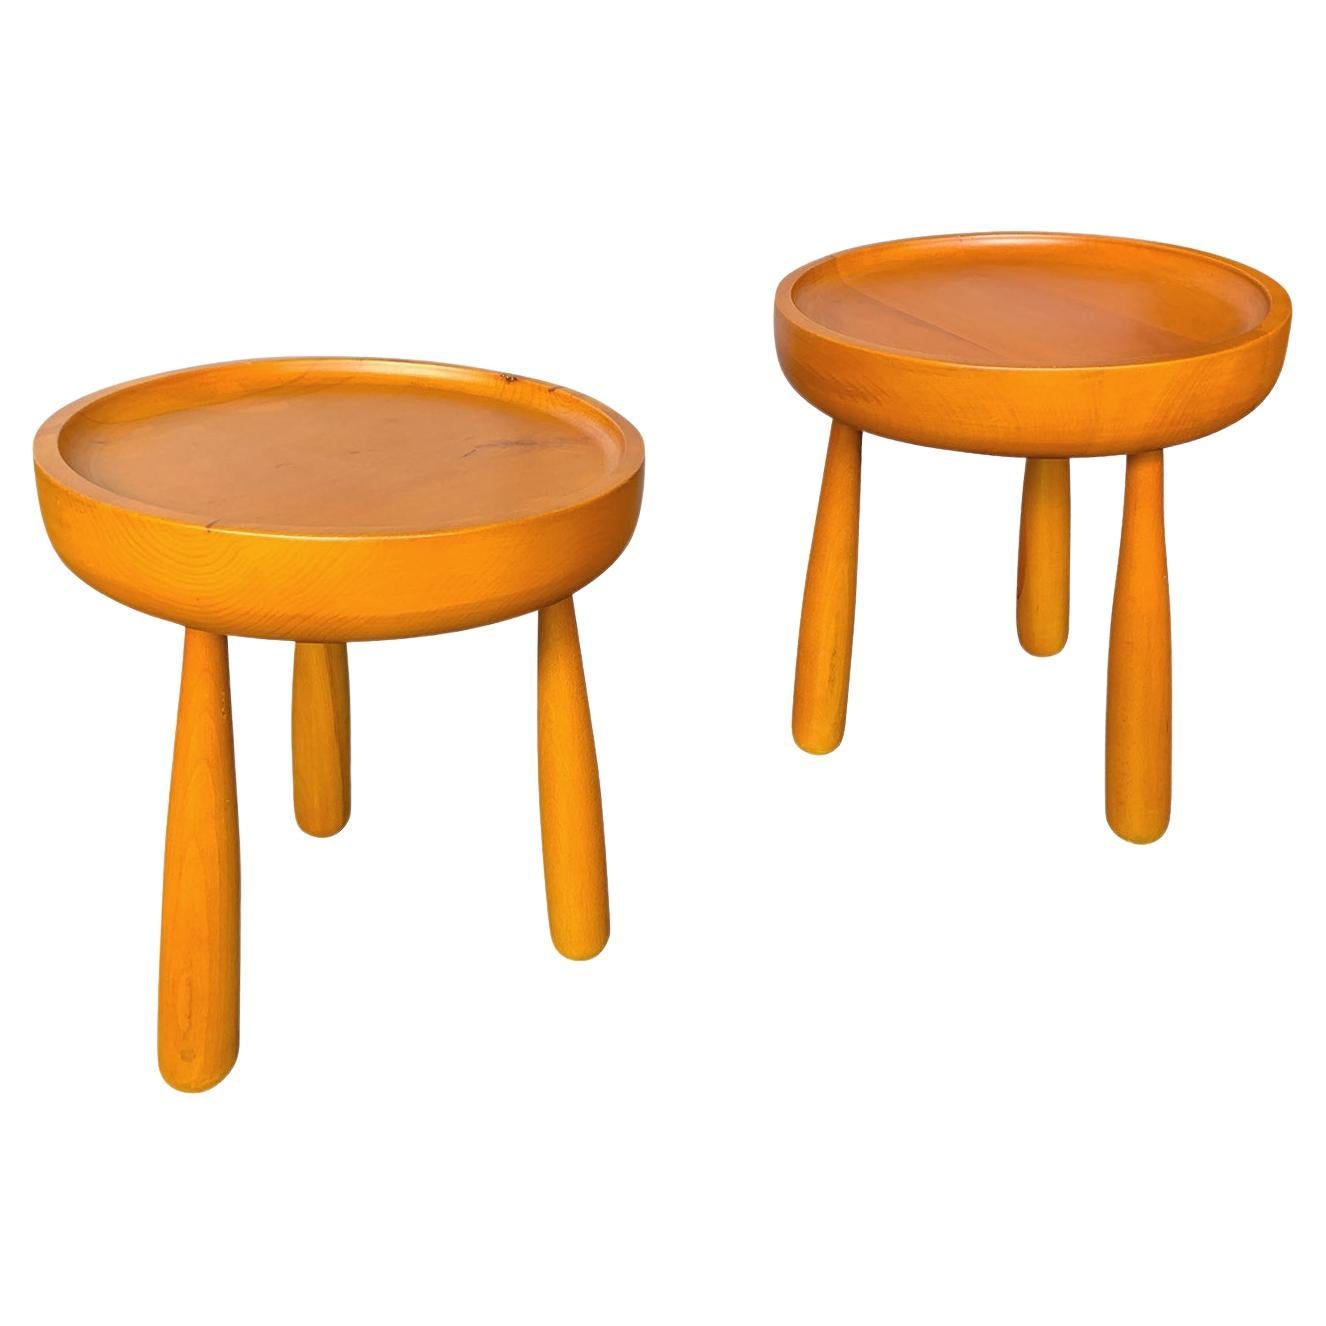 Pair of Dish-Top Stool Side Tables in the Style of Sergio Rodrigues